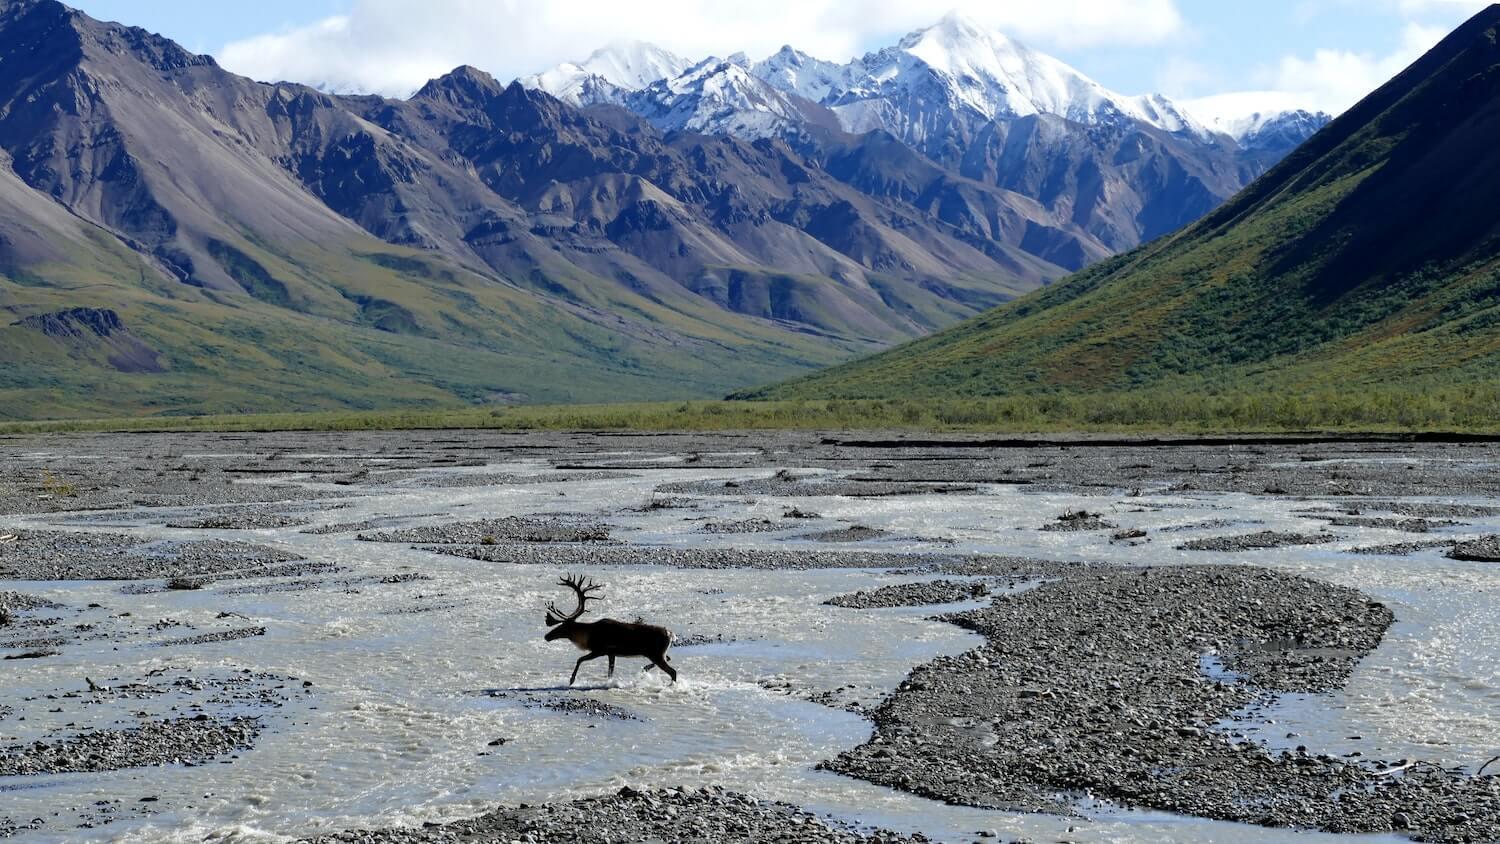 A stag with large antlers crossing a wide, shallow stream in a valley with snowy mountains in the background